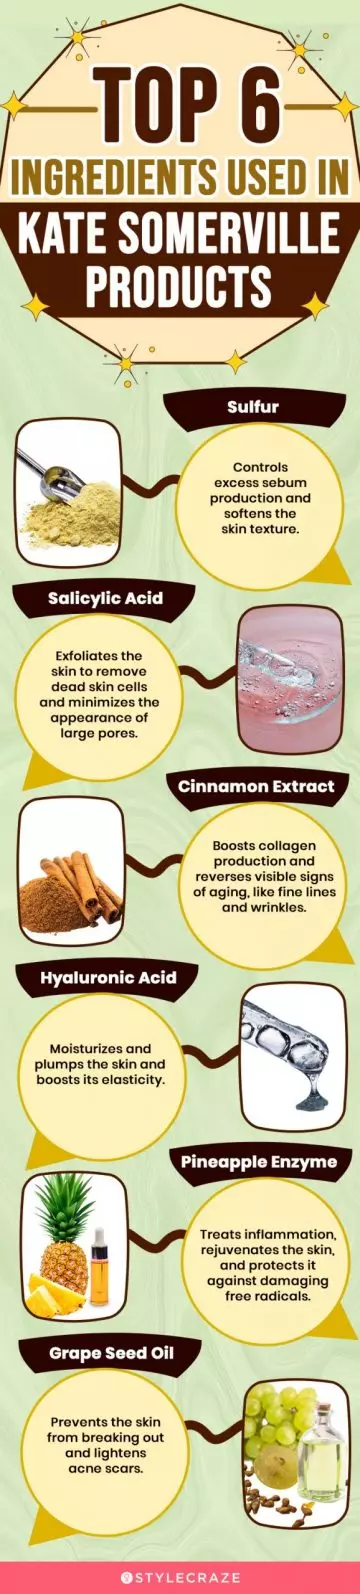 Top 6 Ingredients Used In Kate Somerville Products (infographic)